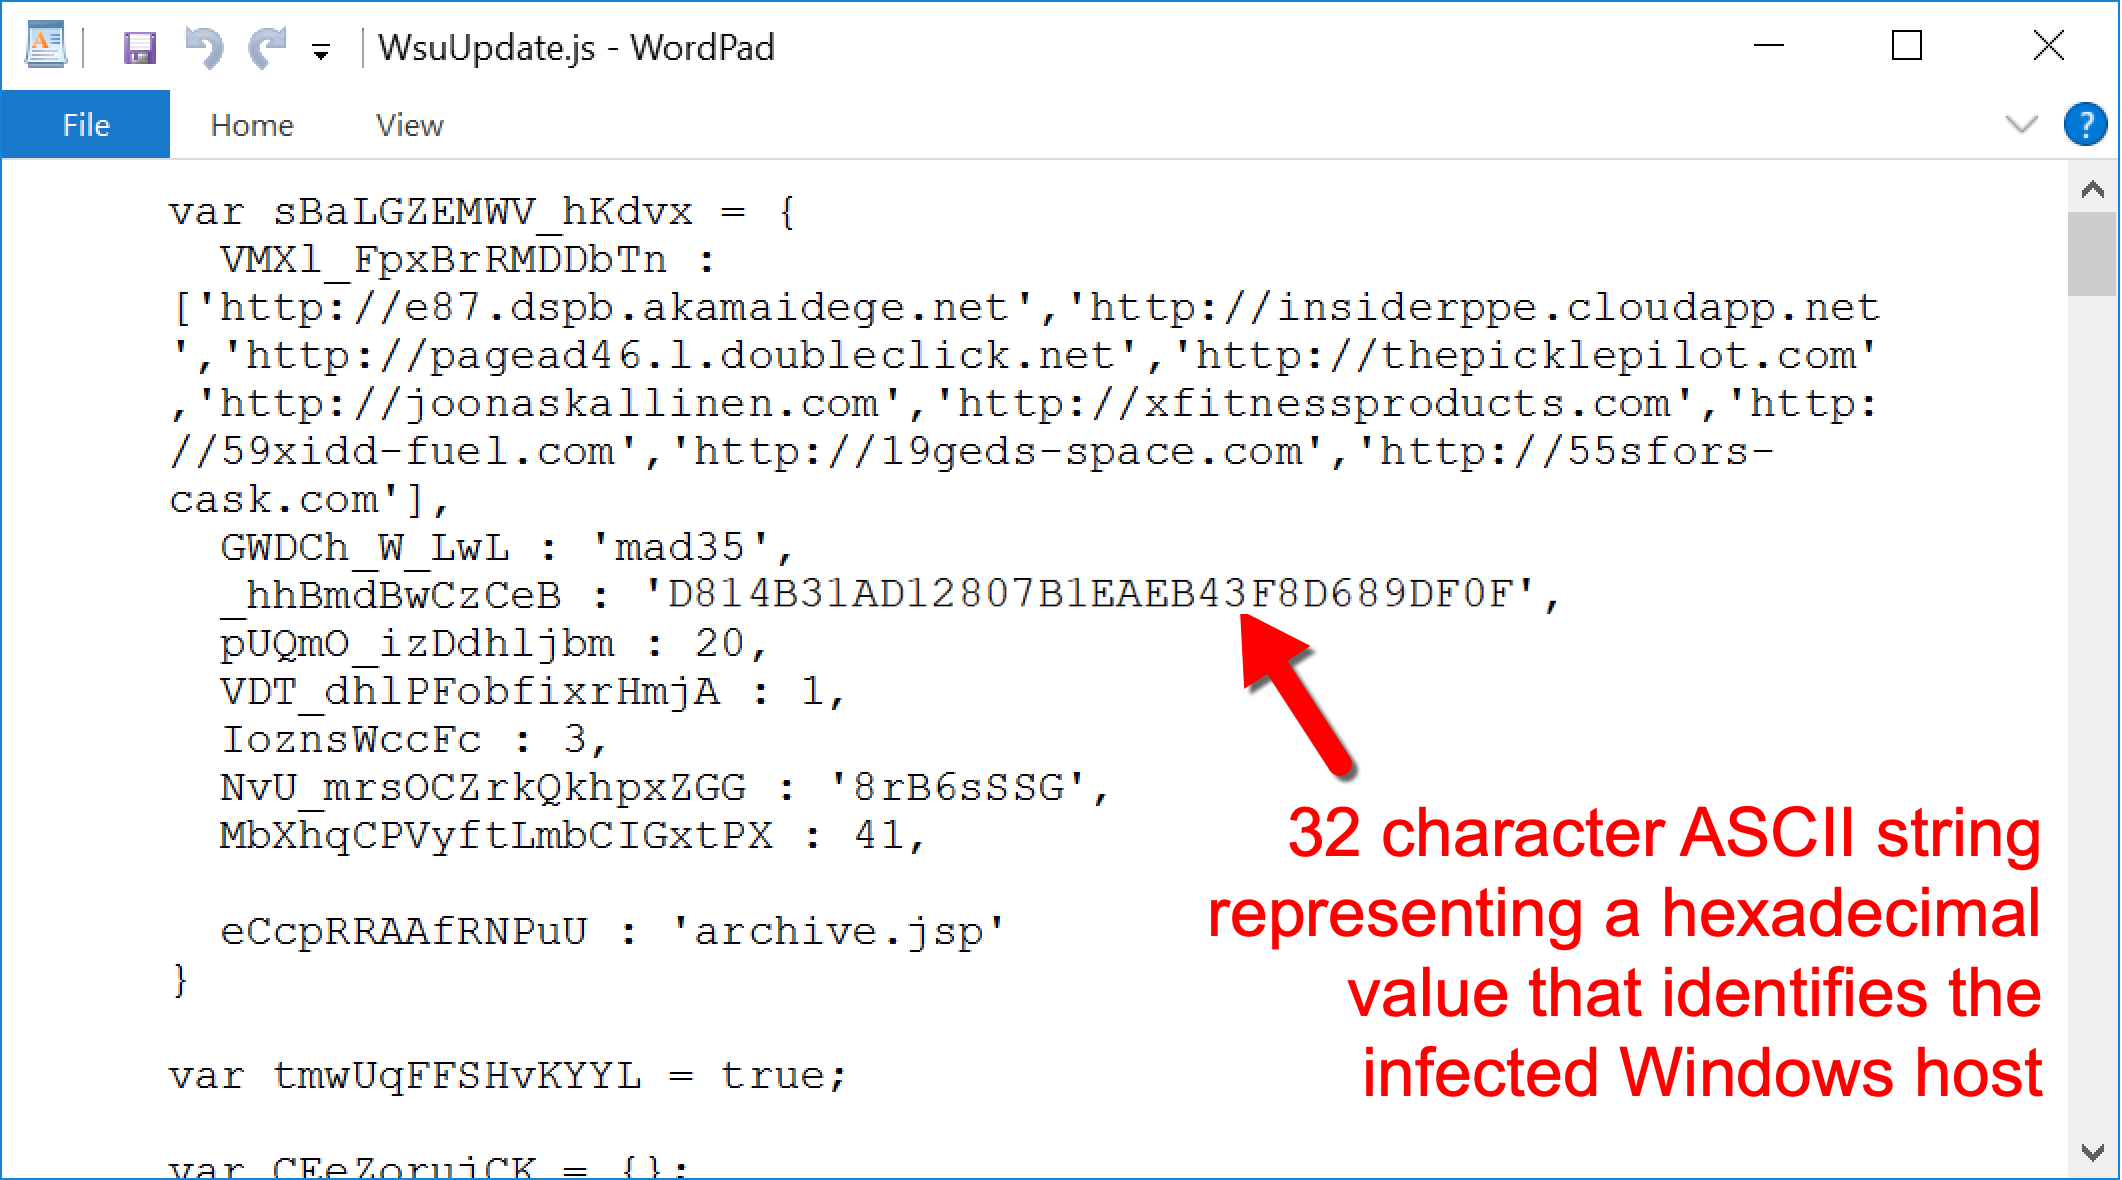 Within the contents of the JS file used to keep the Valak infection persistent, we identified a 32-character ASCII string representing a hexadecimal value that identifies the infected Windows host